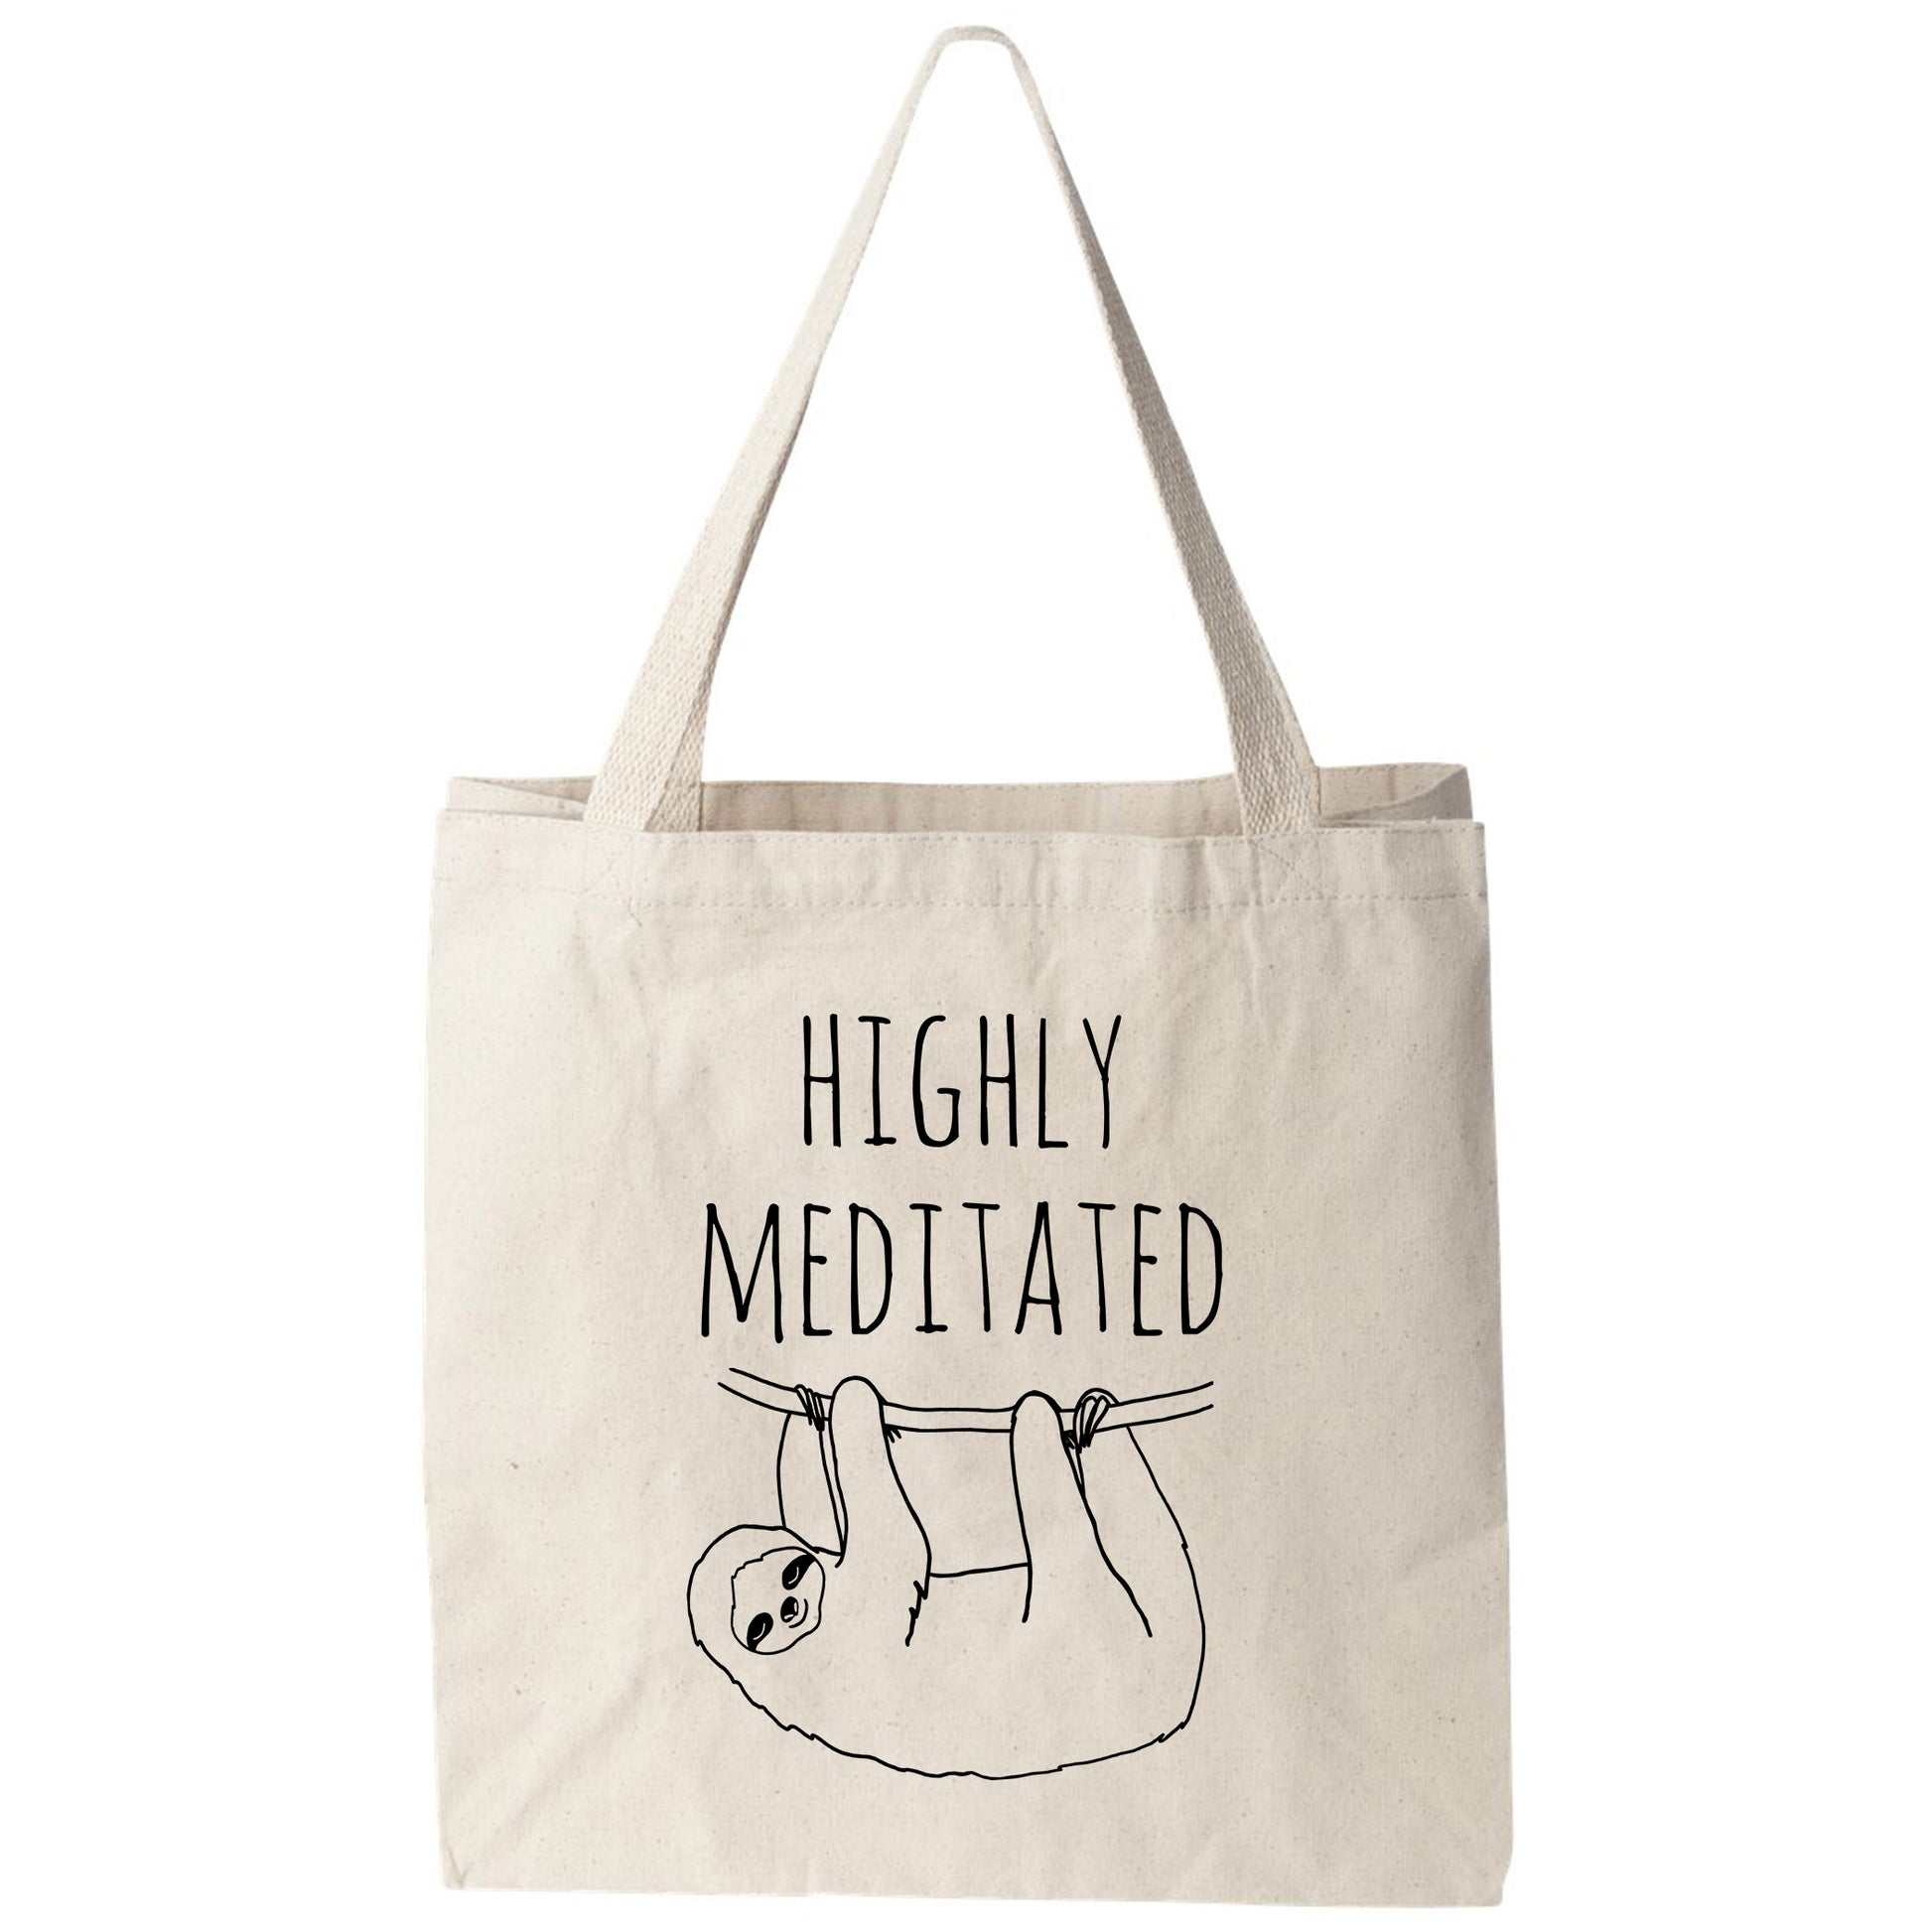 a tote bag that says highly meditated